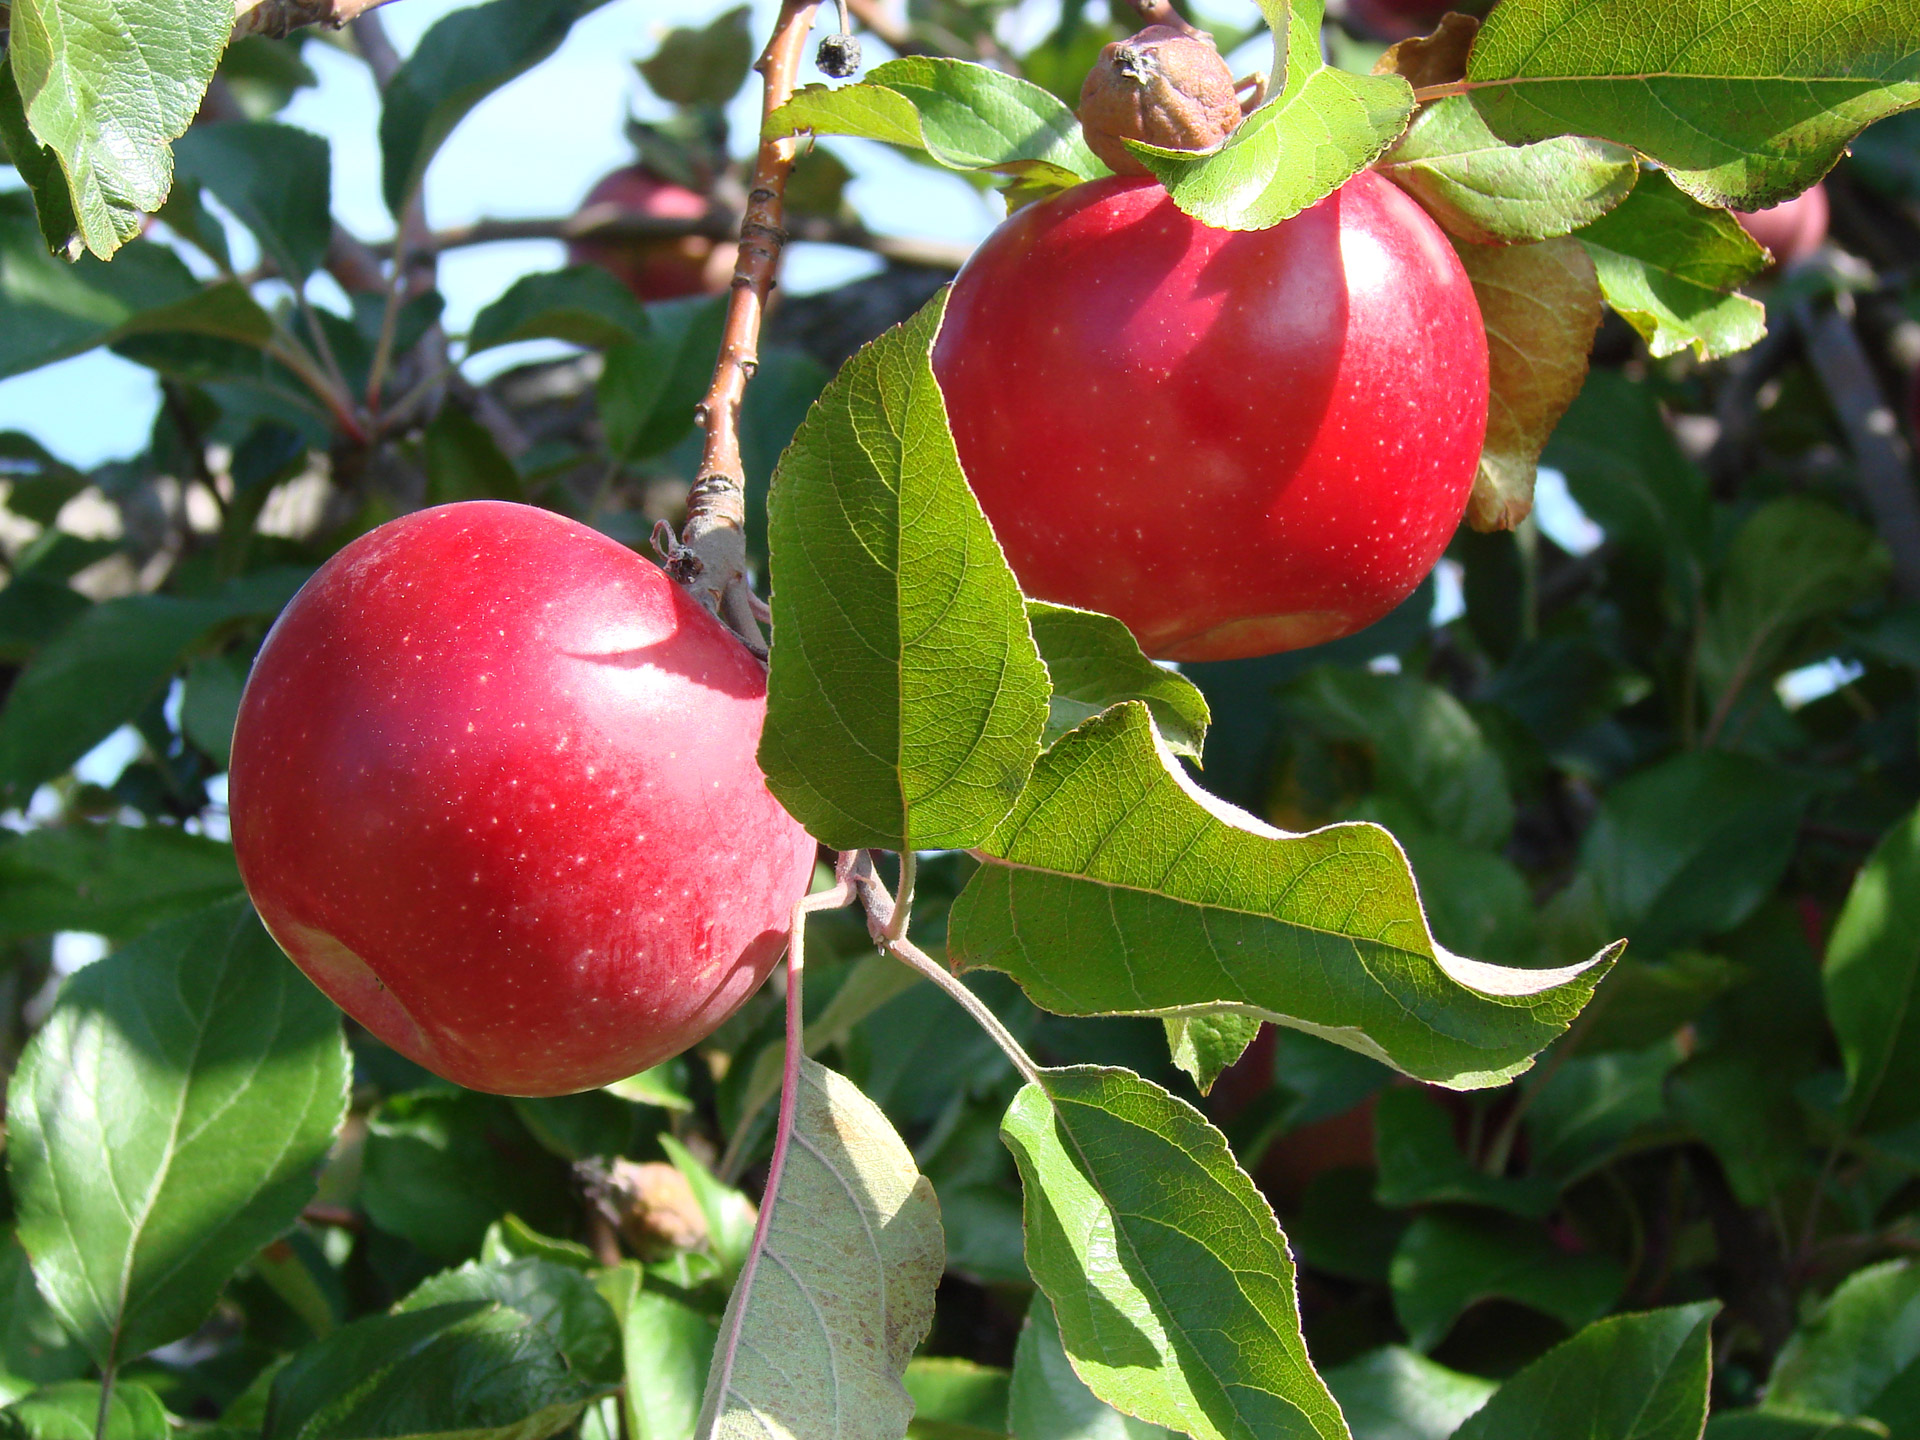 Picture of two apples on an apple tree